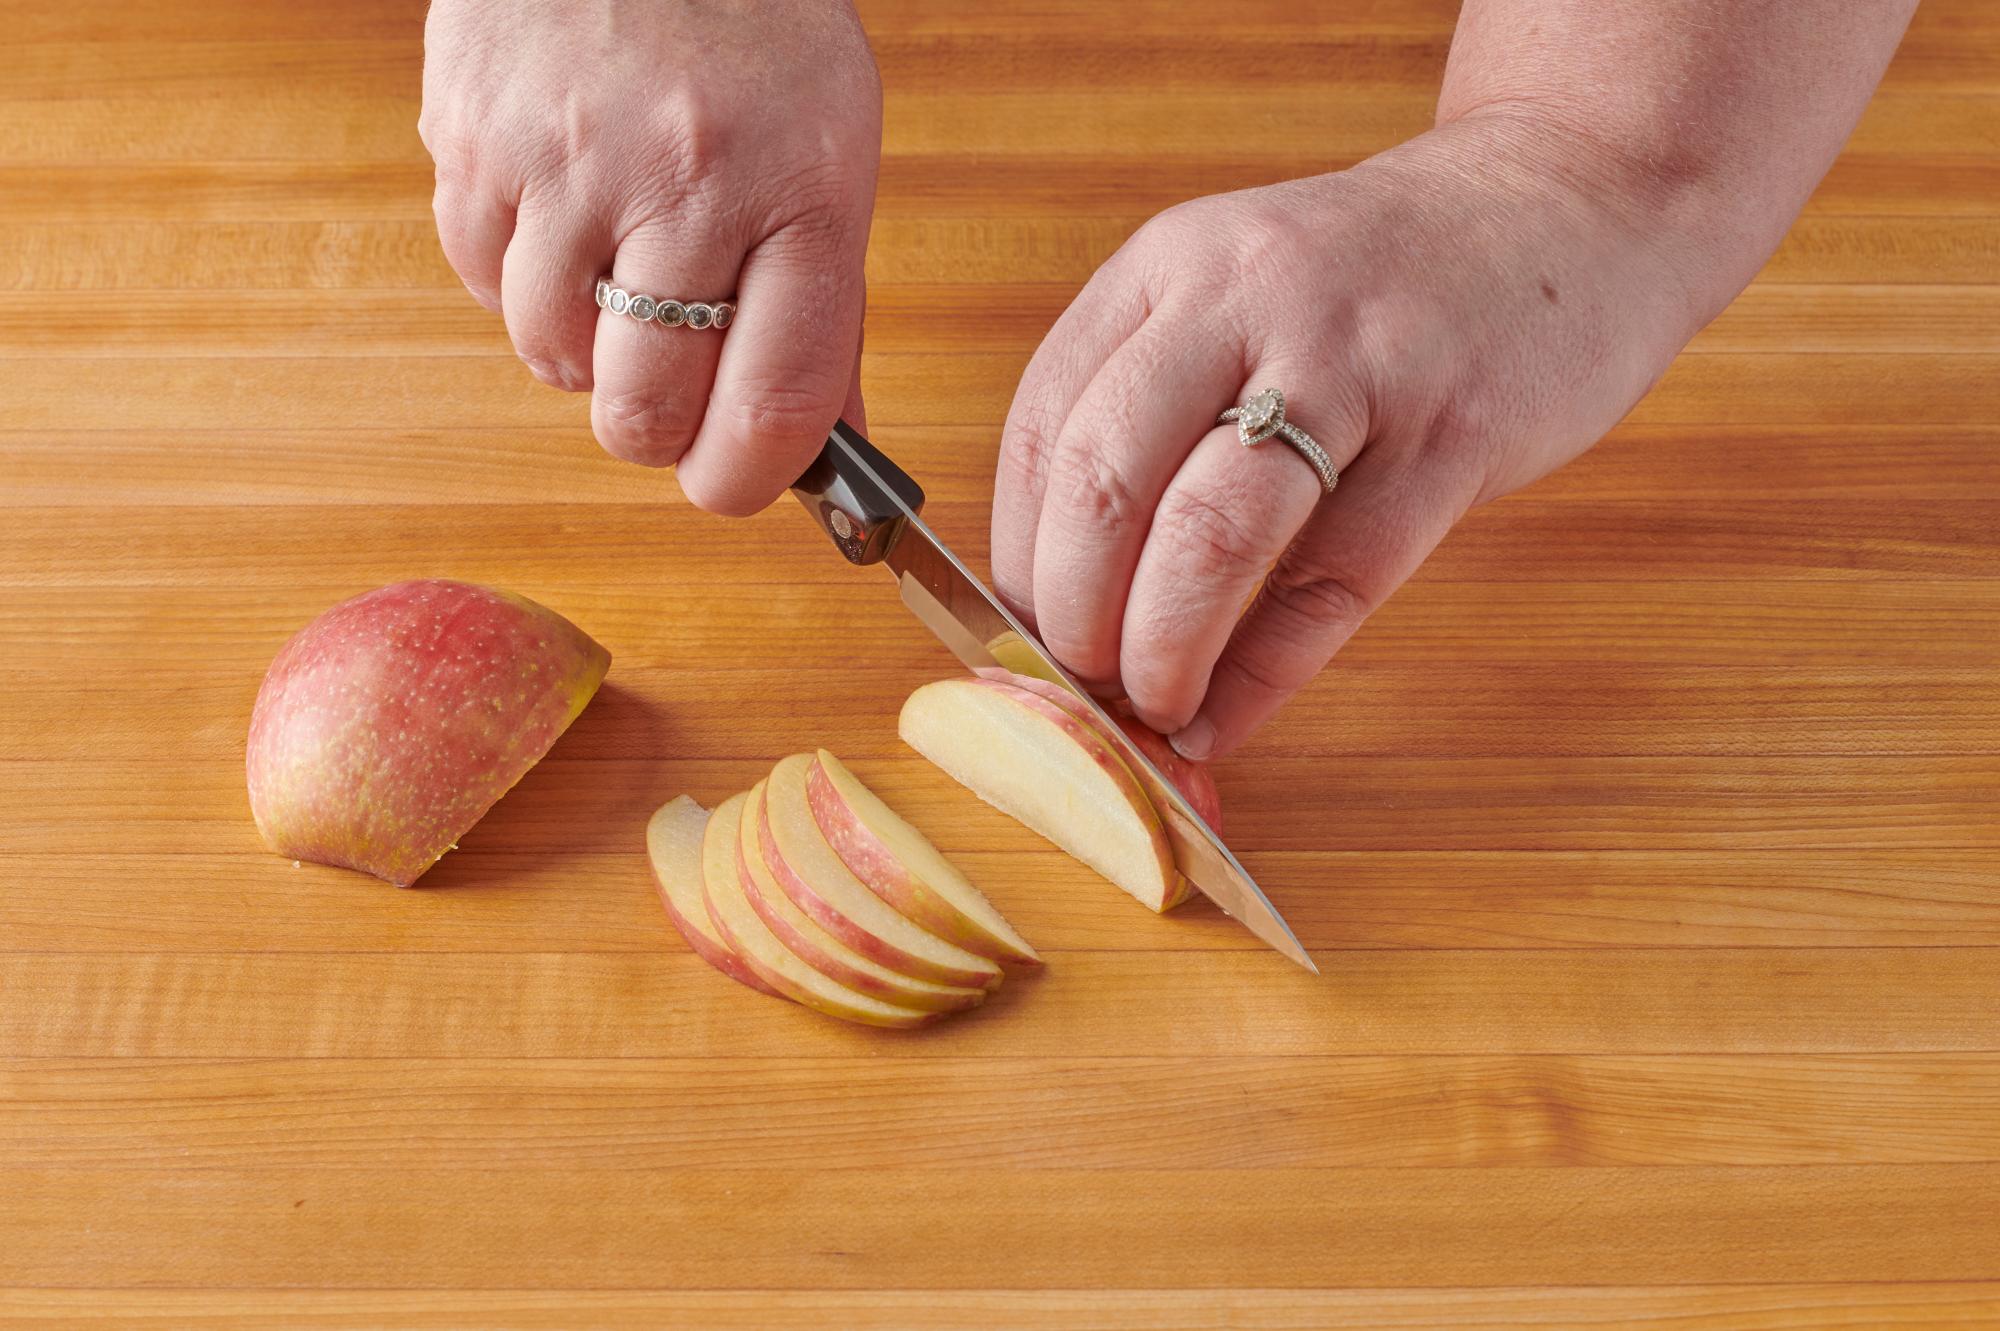 Slicing apples with a 4 Inch Paring Knife.